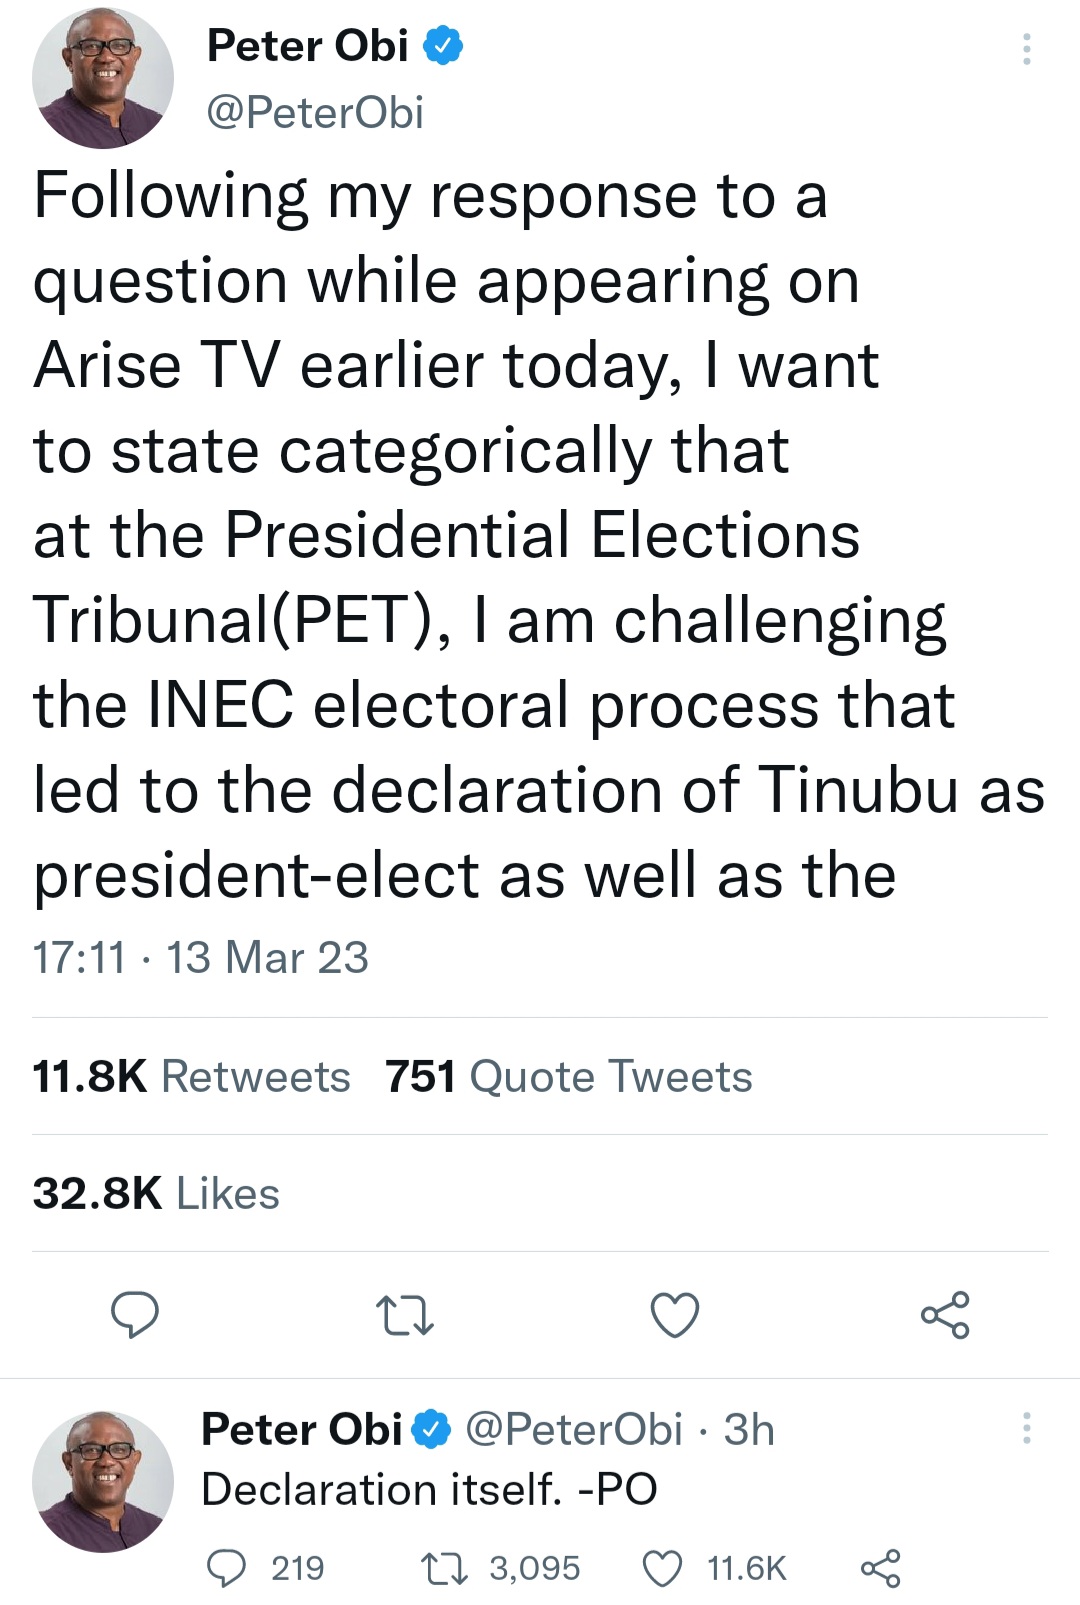 Peter Obi makes U-turn, says he will challenge not only election process but also the outcome